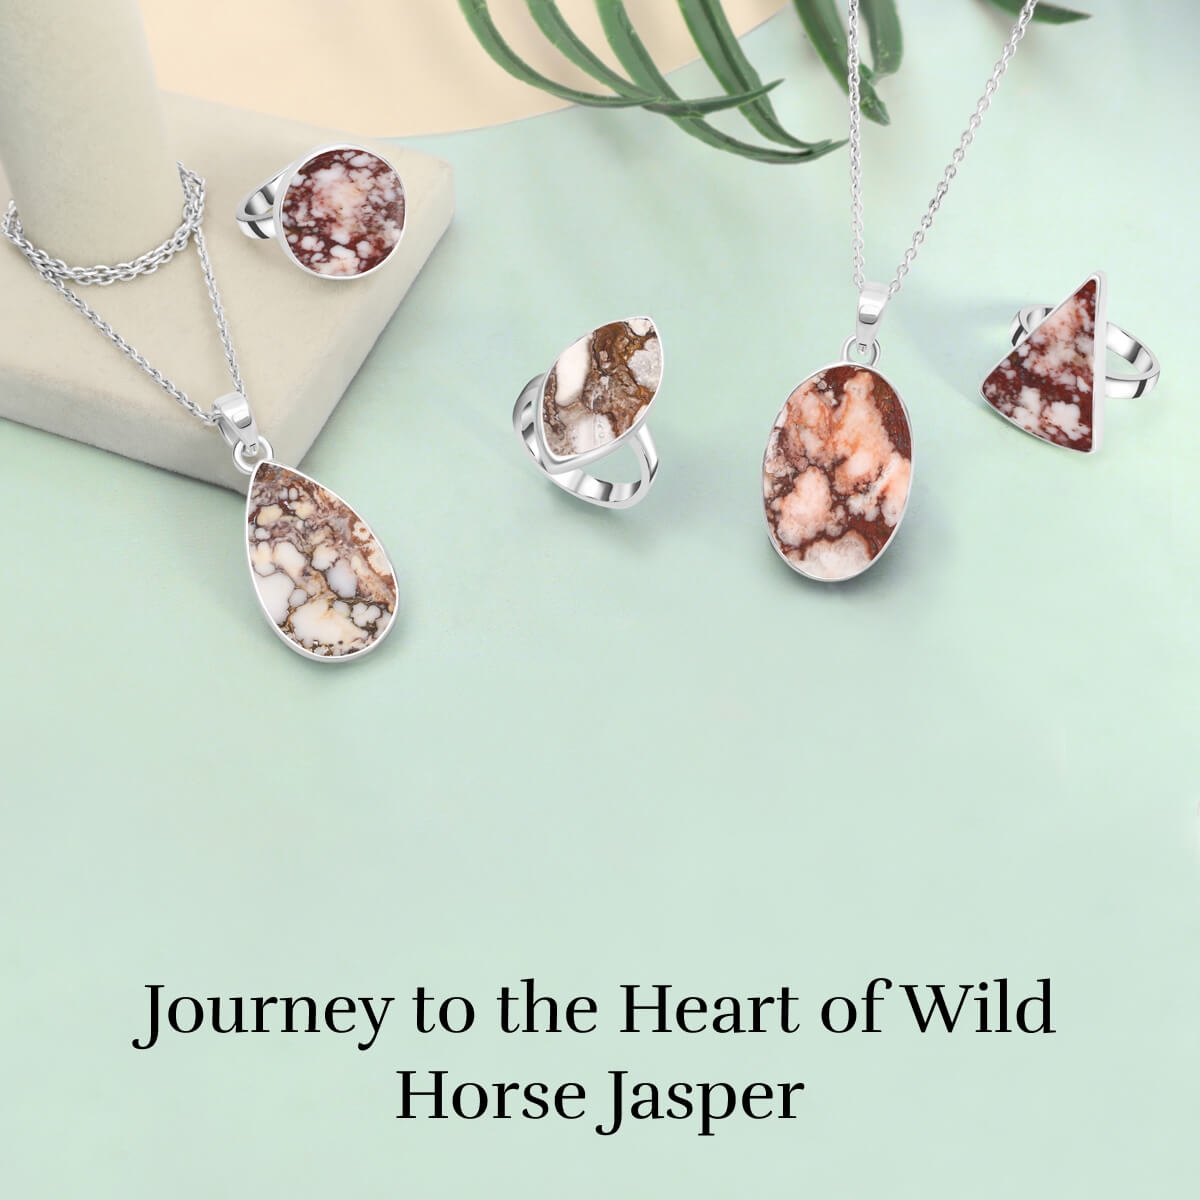 Formation and Occurrence of Wild Horse Jasper Crystal